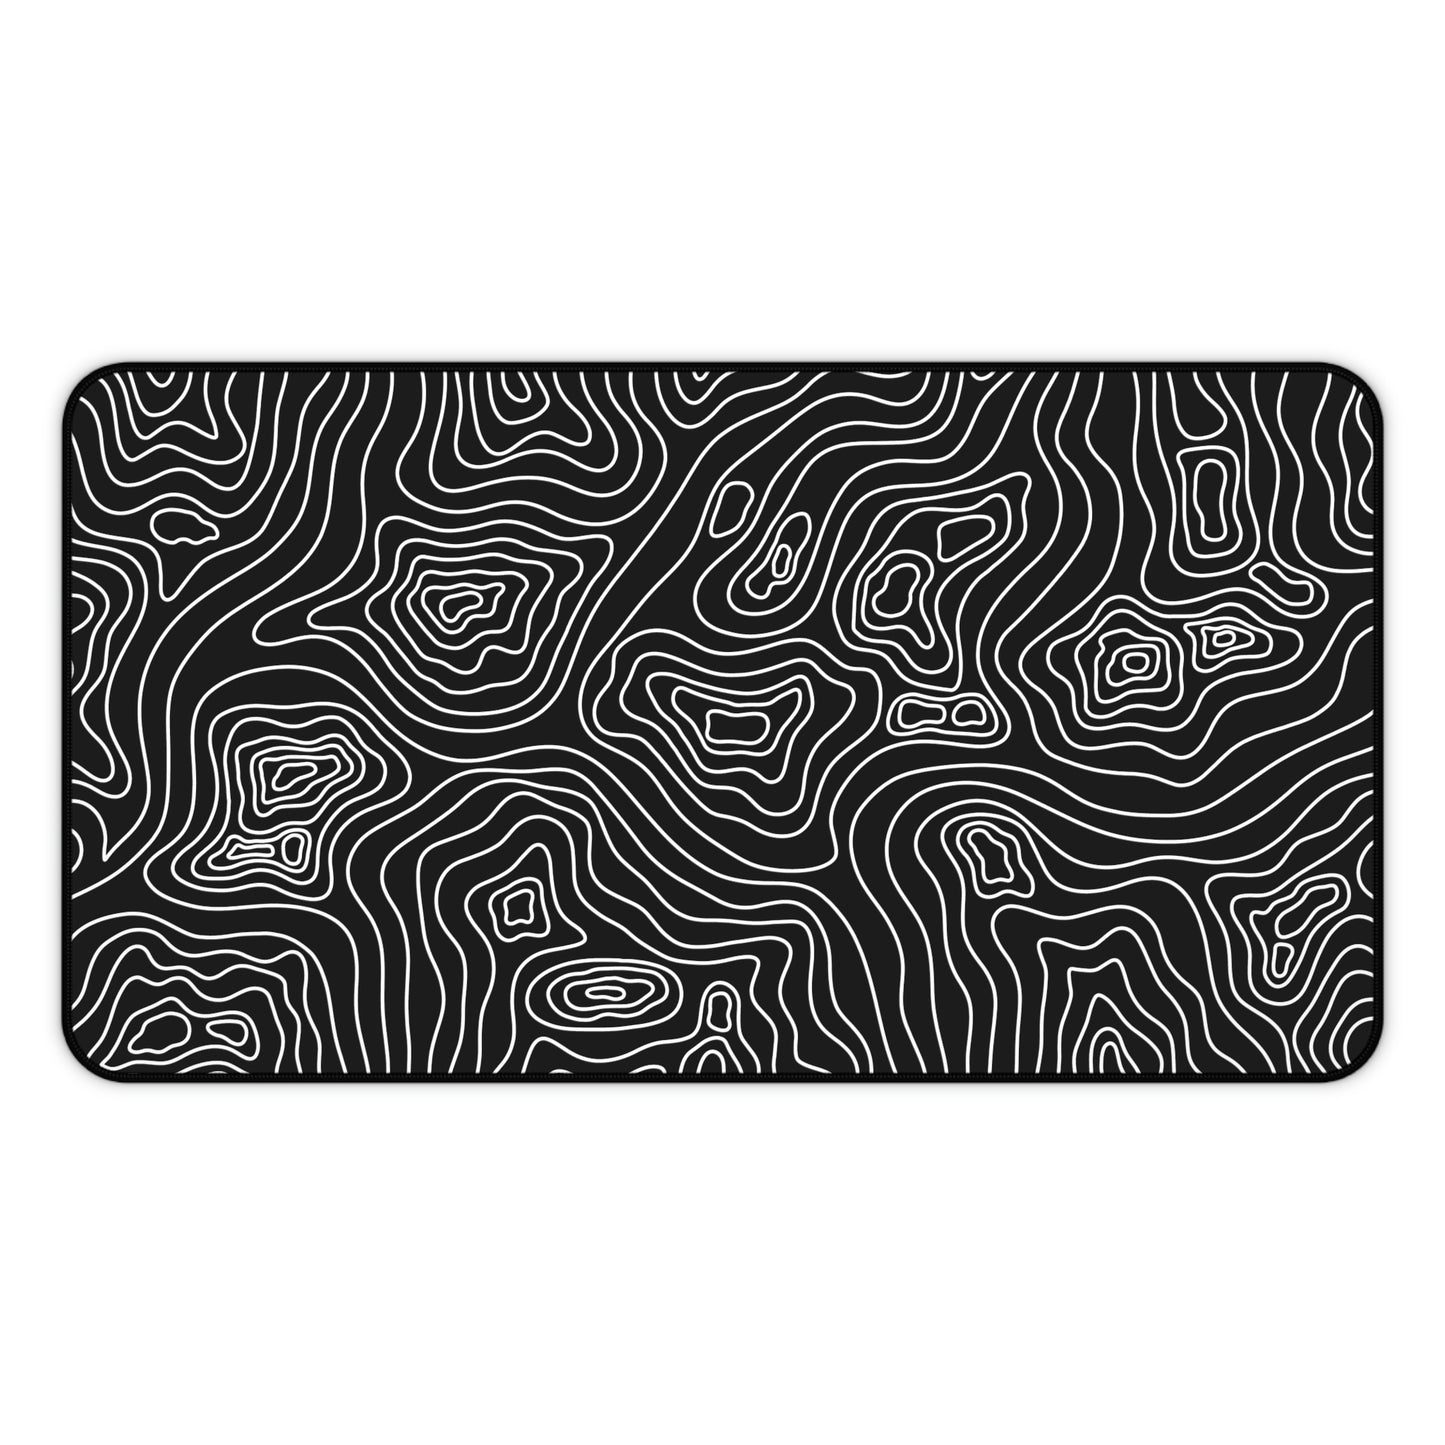 A 12" x 22" black desk mat with white topographic lines.